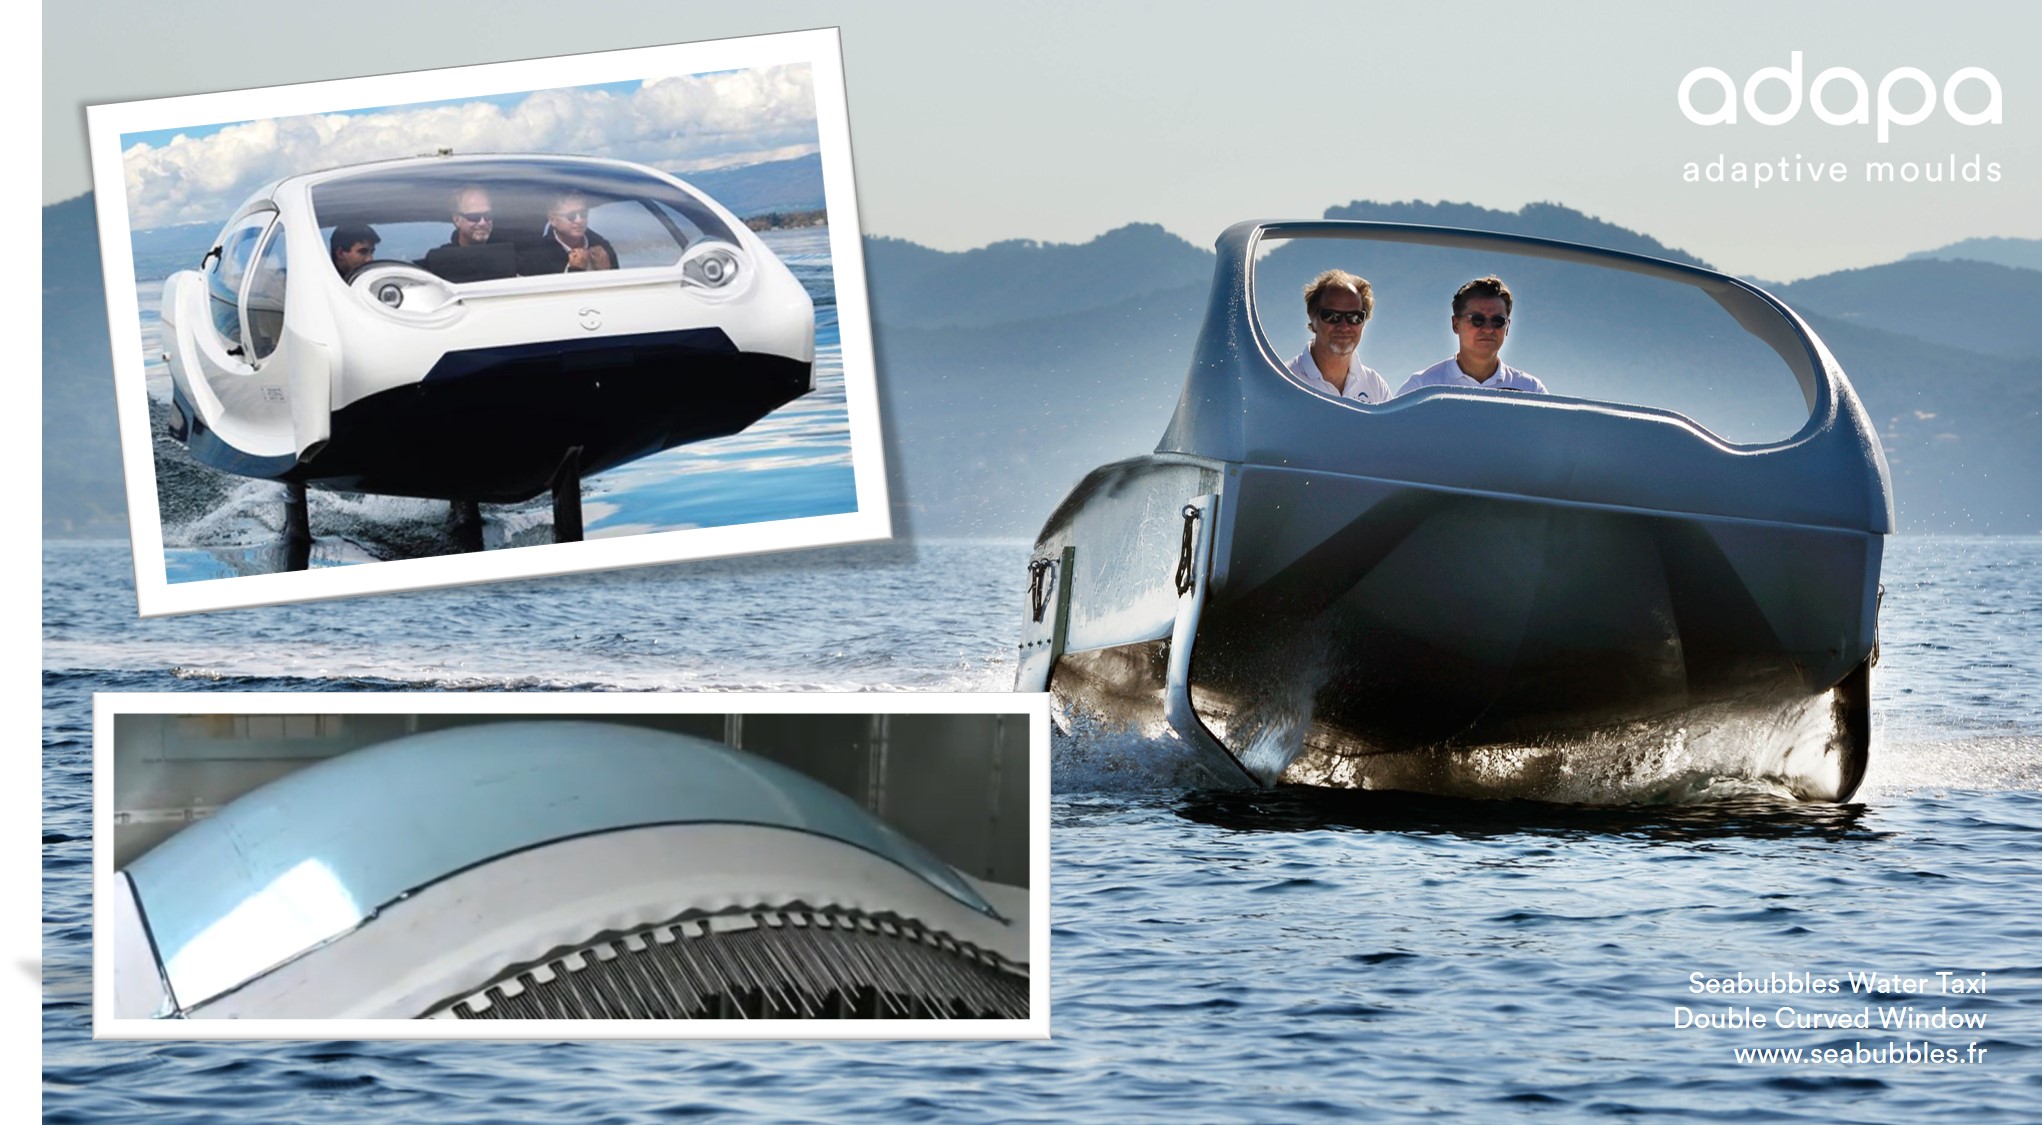 Seabubbles Water Taxi France